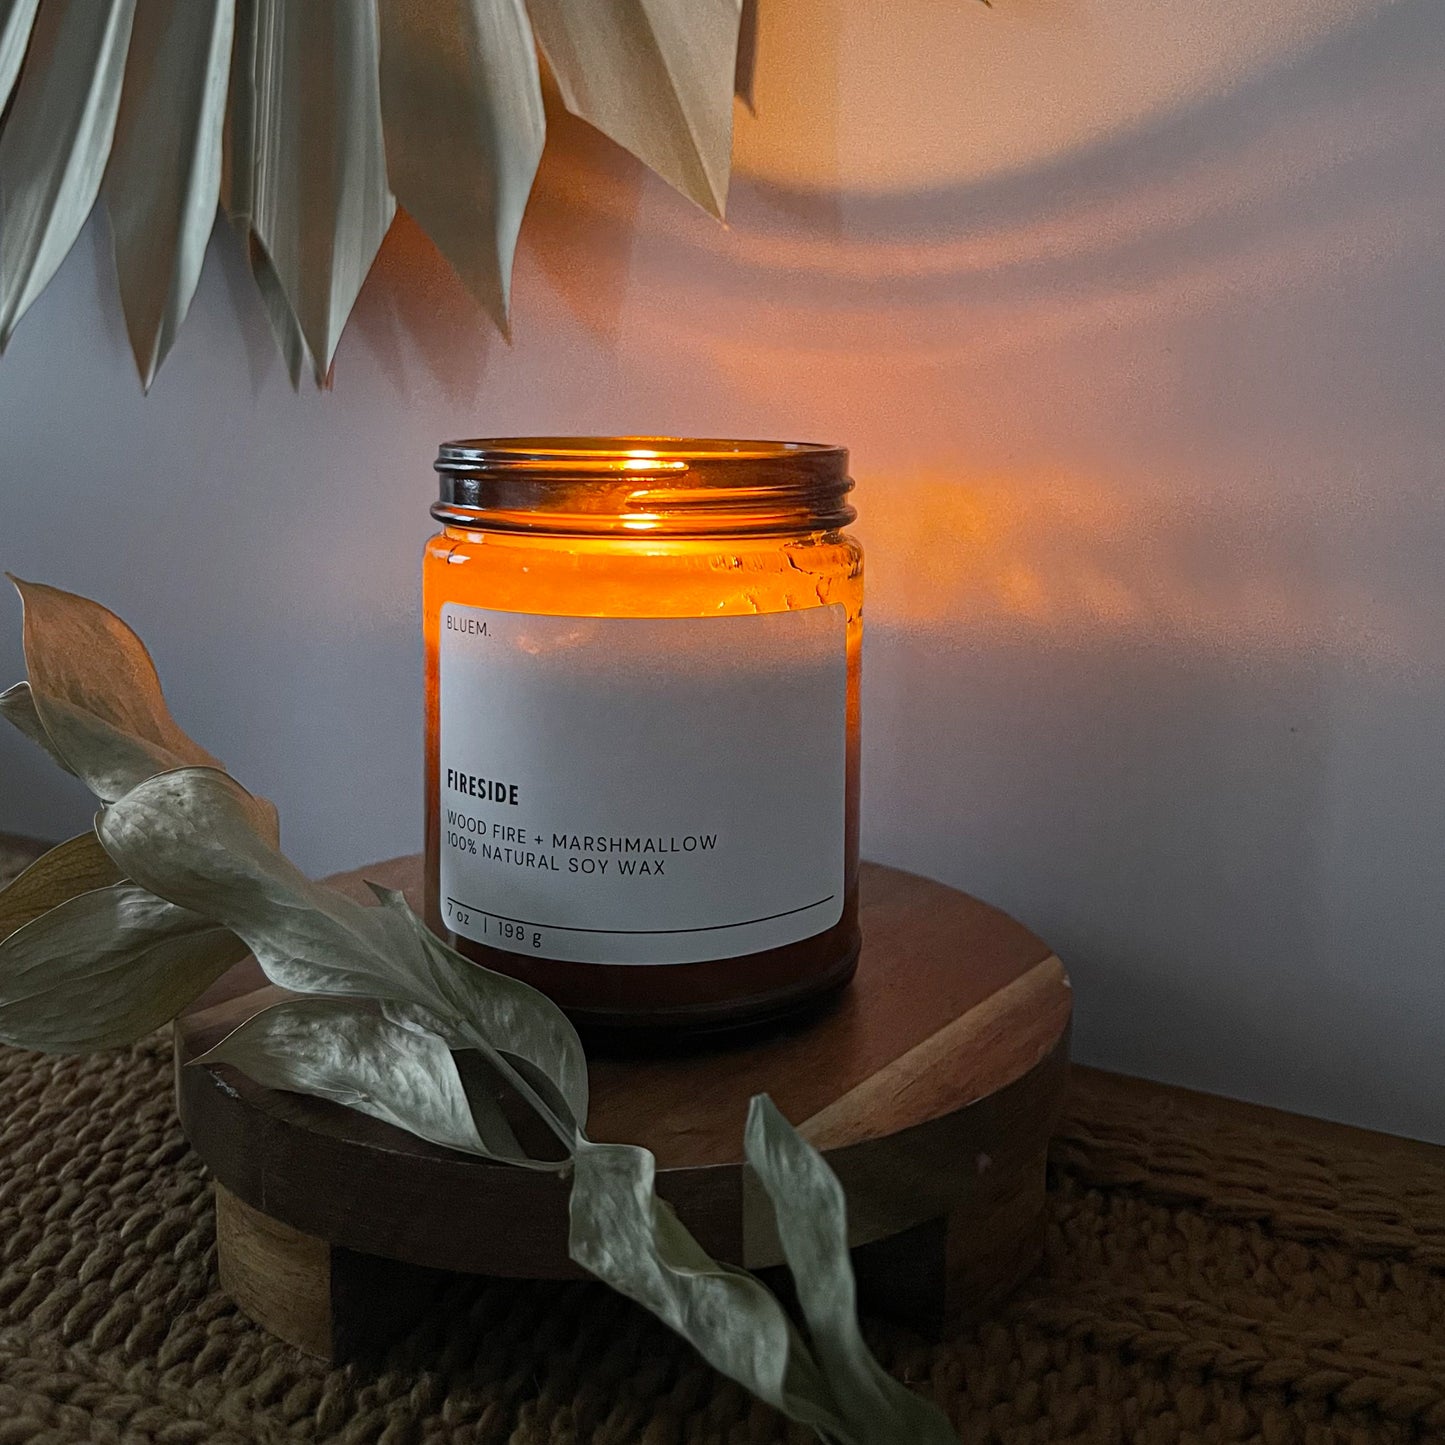 Bluem Fireside Soy Wax Candle 